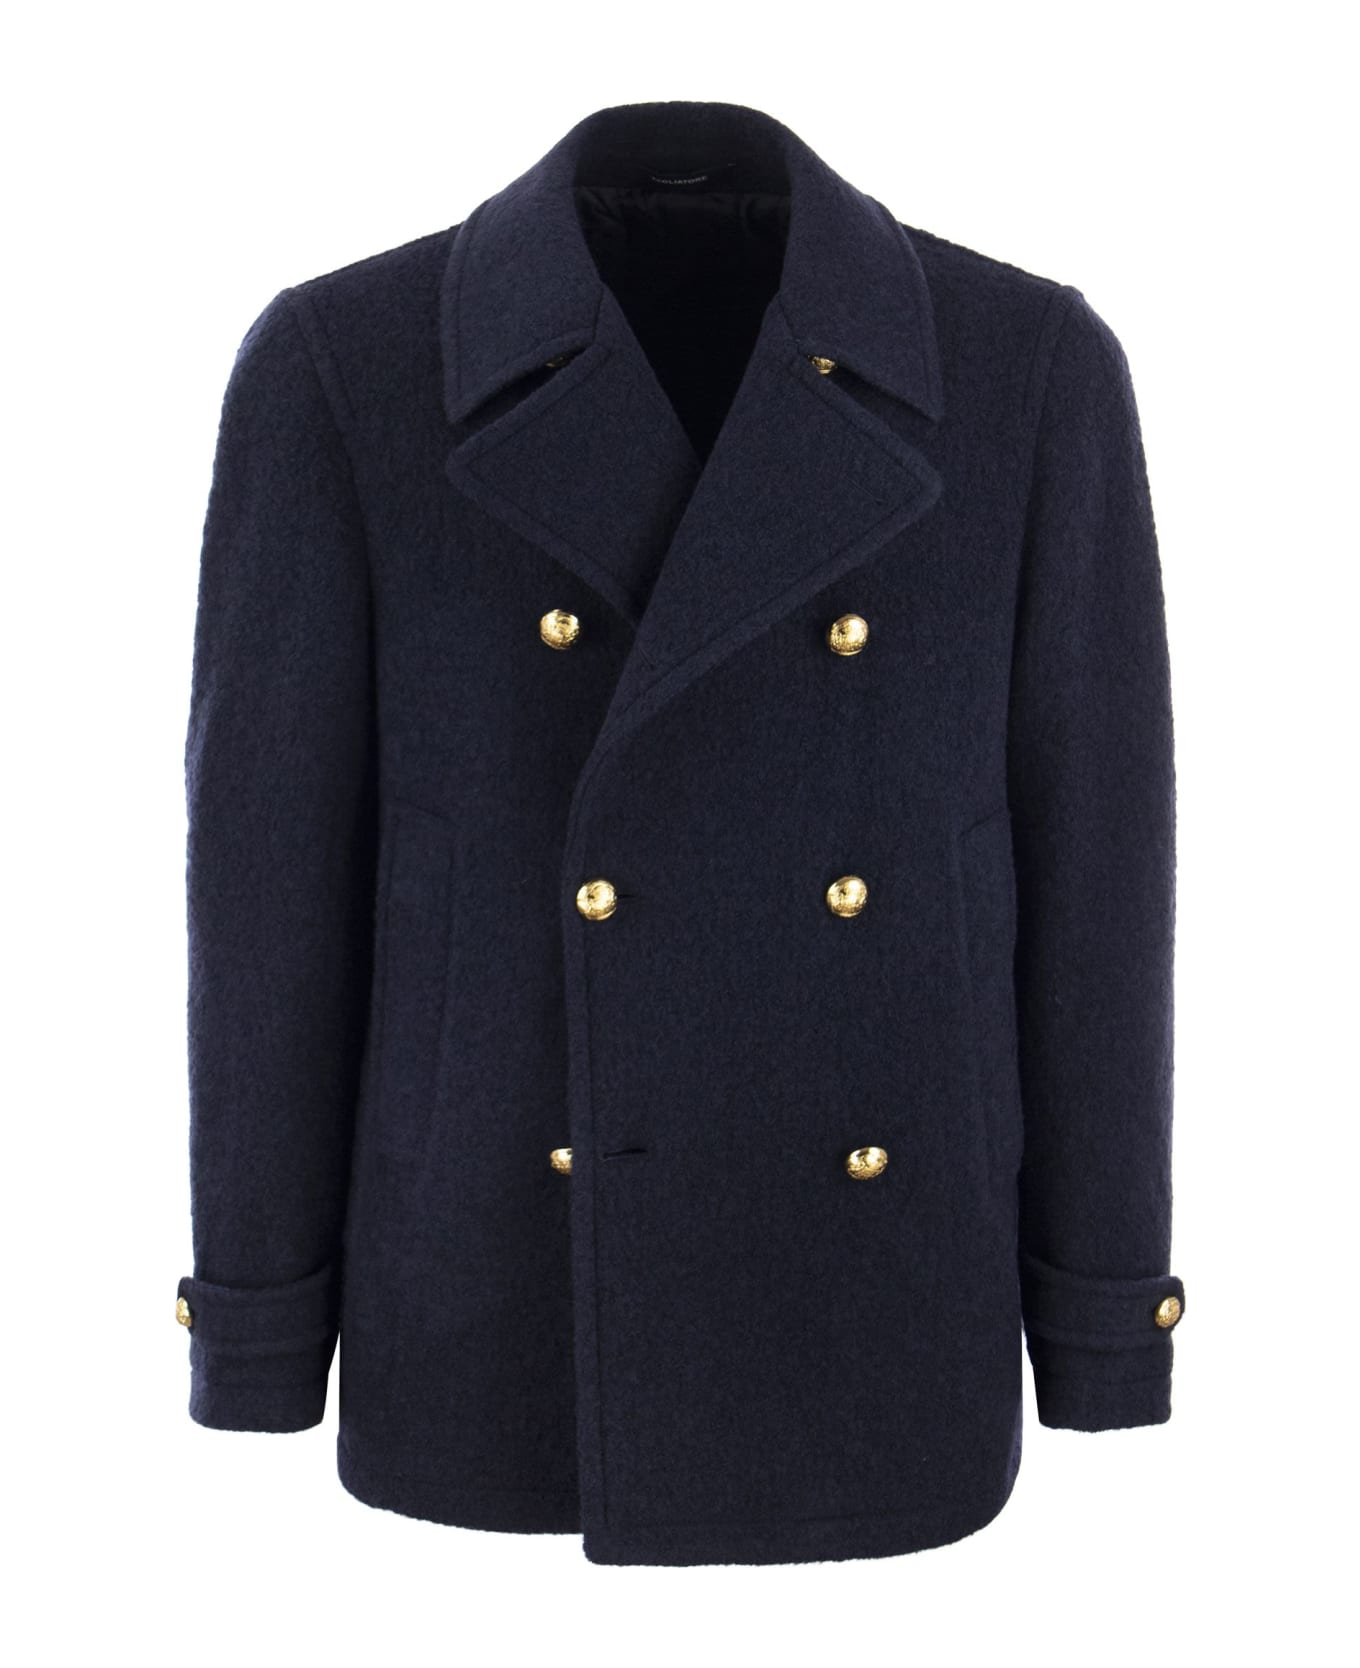 Tagliatore Double-breasted Coat - Navy Blue コート